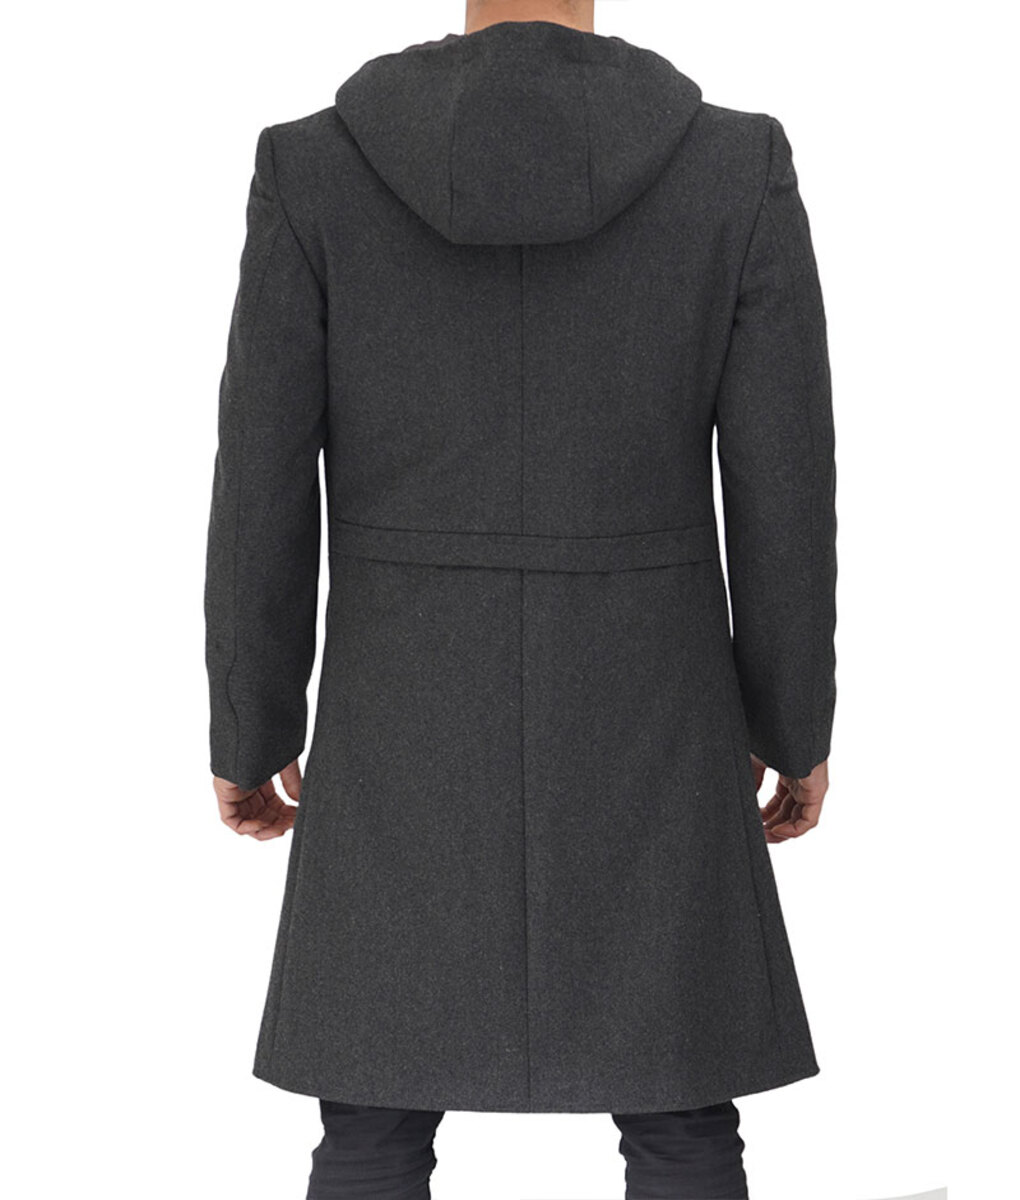 Mens Grey Wool Coat With Hood - FREE SHIPPING